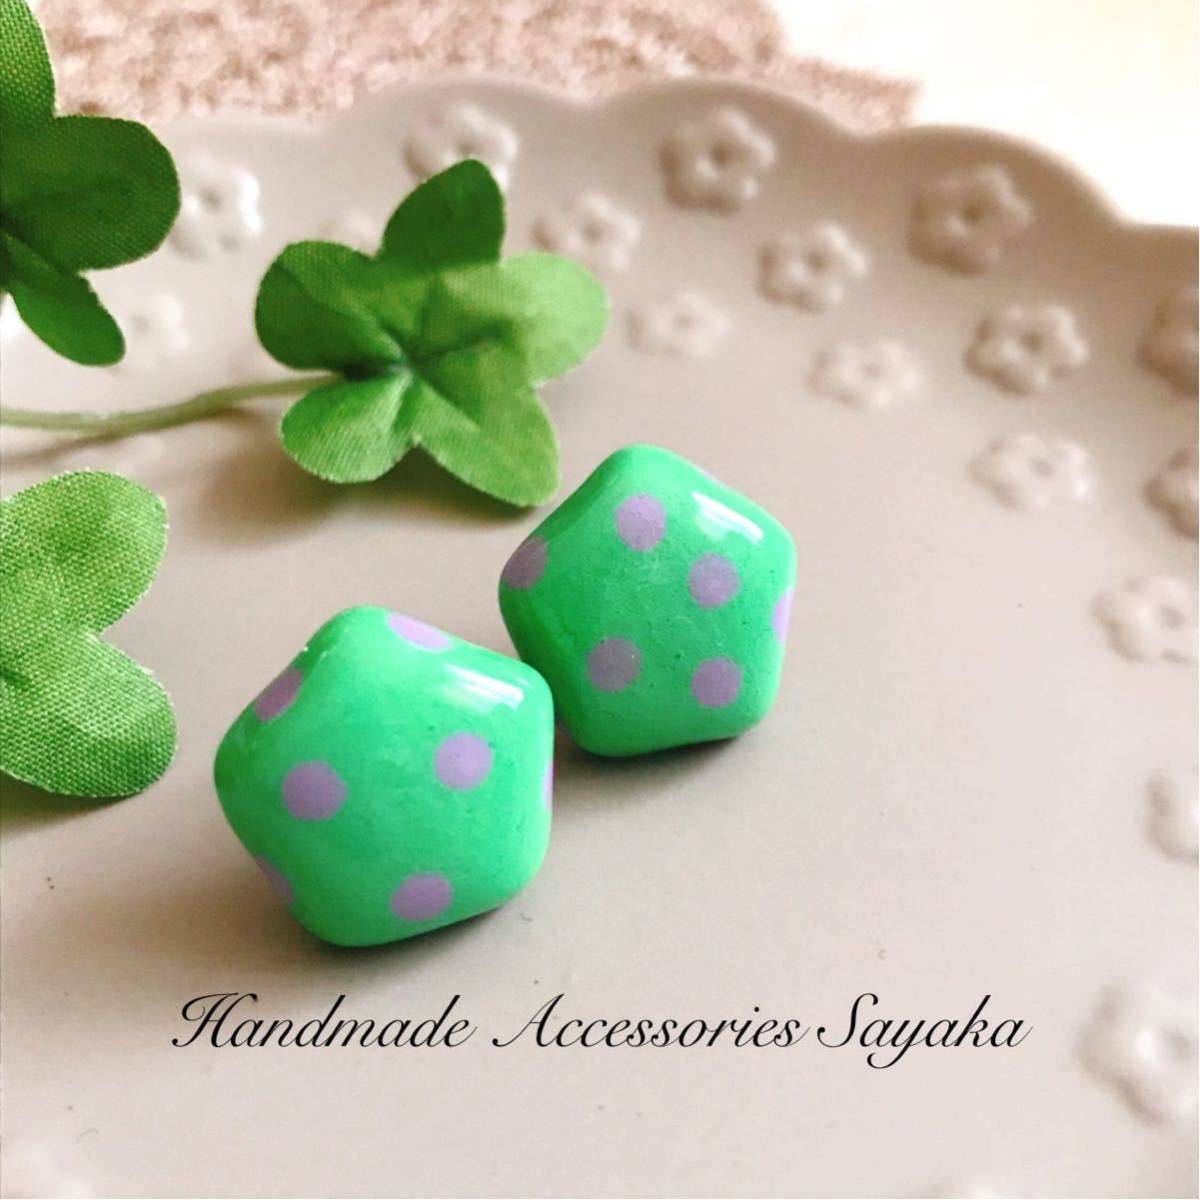 Brand new, instant purchase◆Handmade stud earrings, stone clay, resin accessories, emerald green, retro pop, hand-painted, one-of-a-kind, earrings, beads, glass, others